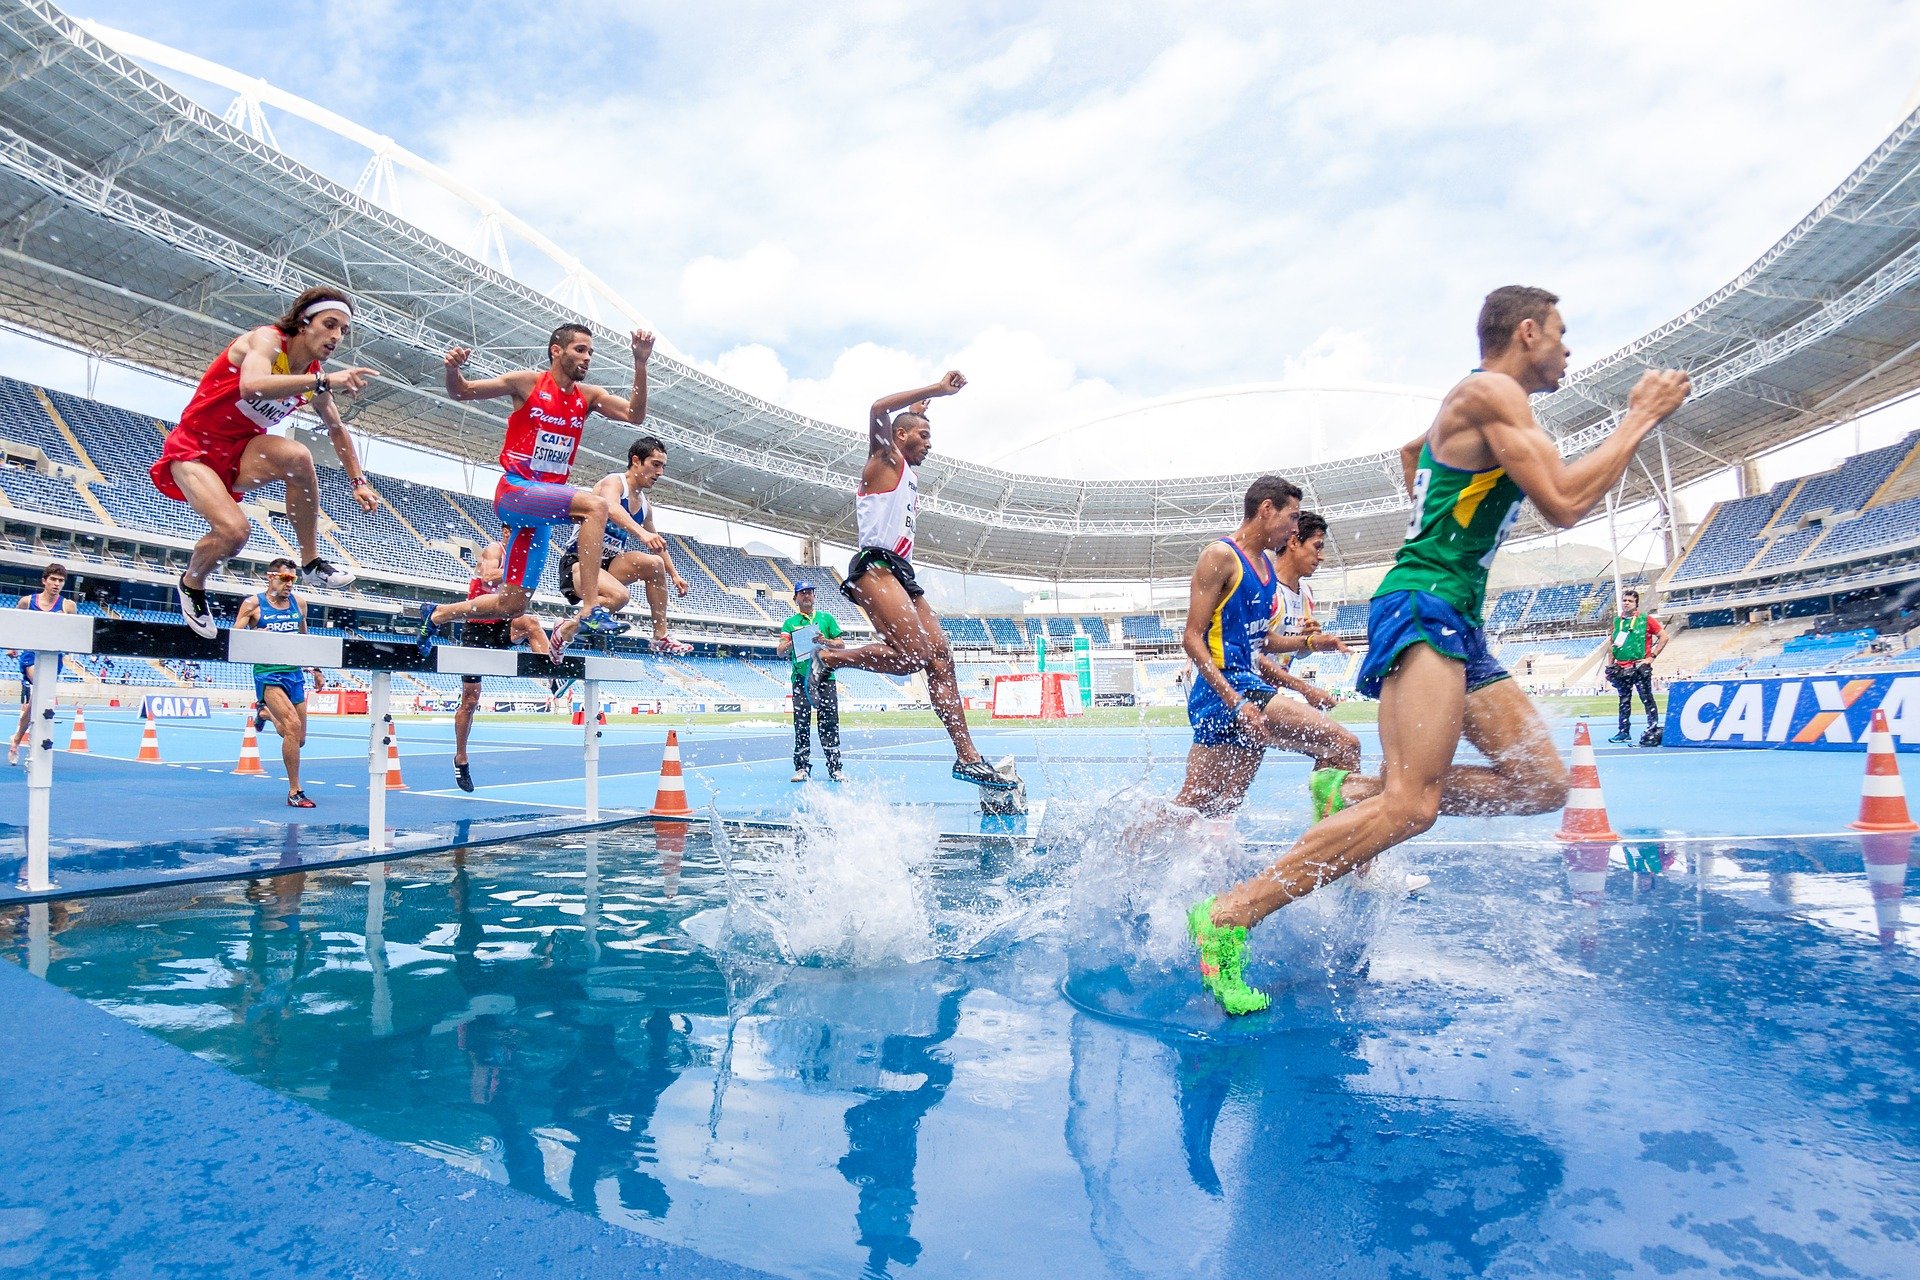 Racing in water...these athletes expect a fair competition